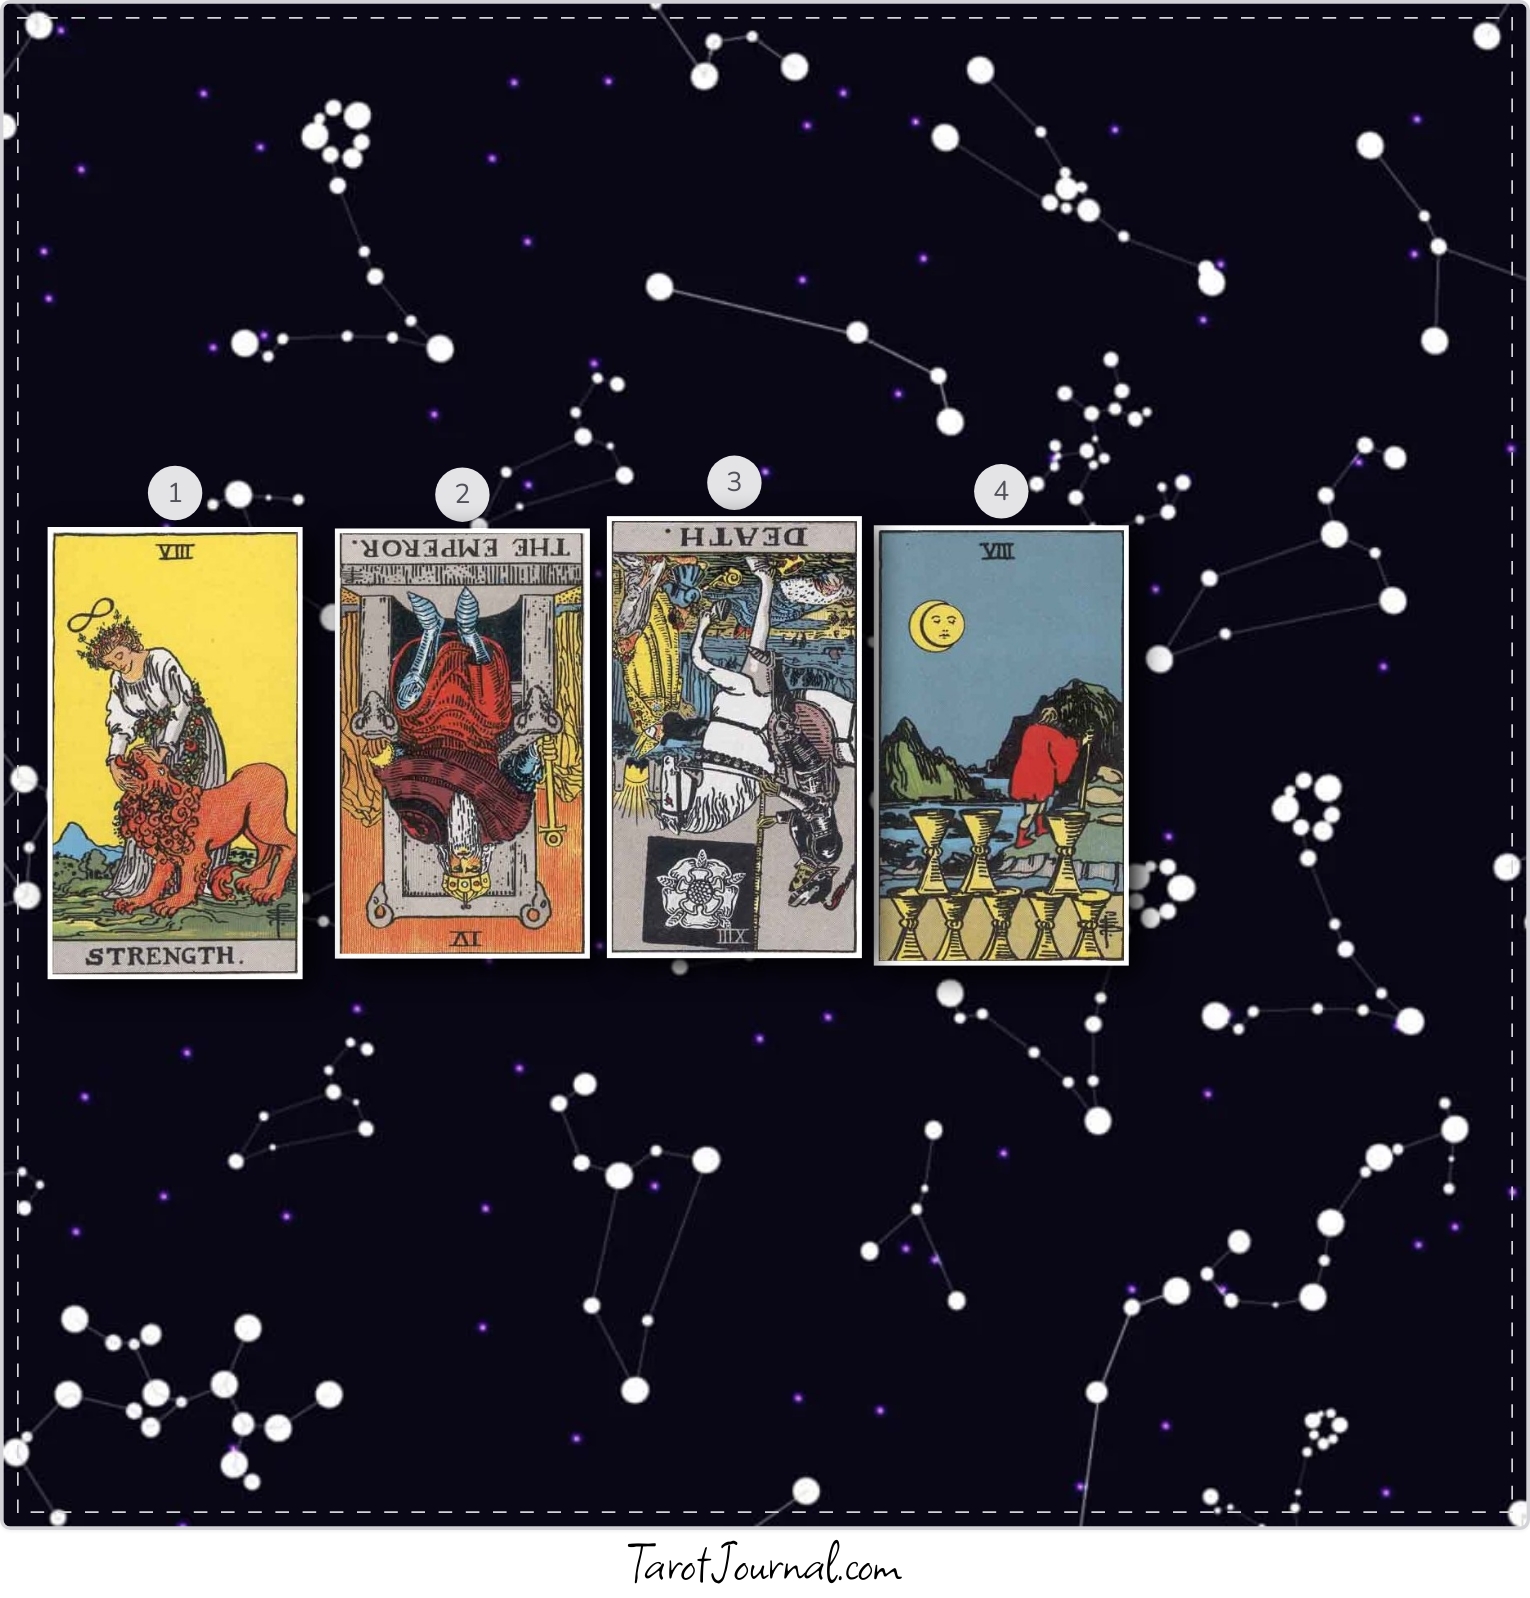 What is my love life going to be like in this upcoming year? - tarot reading by Cooper